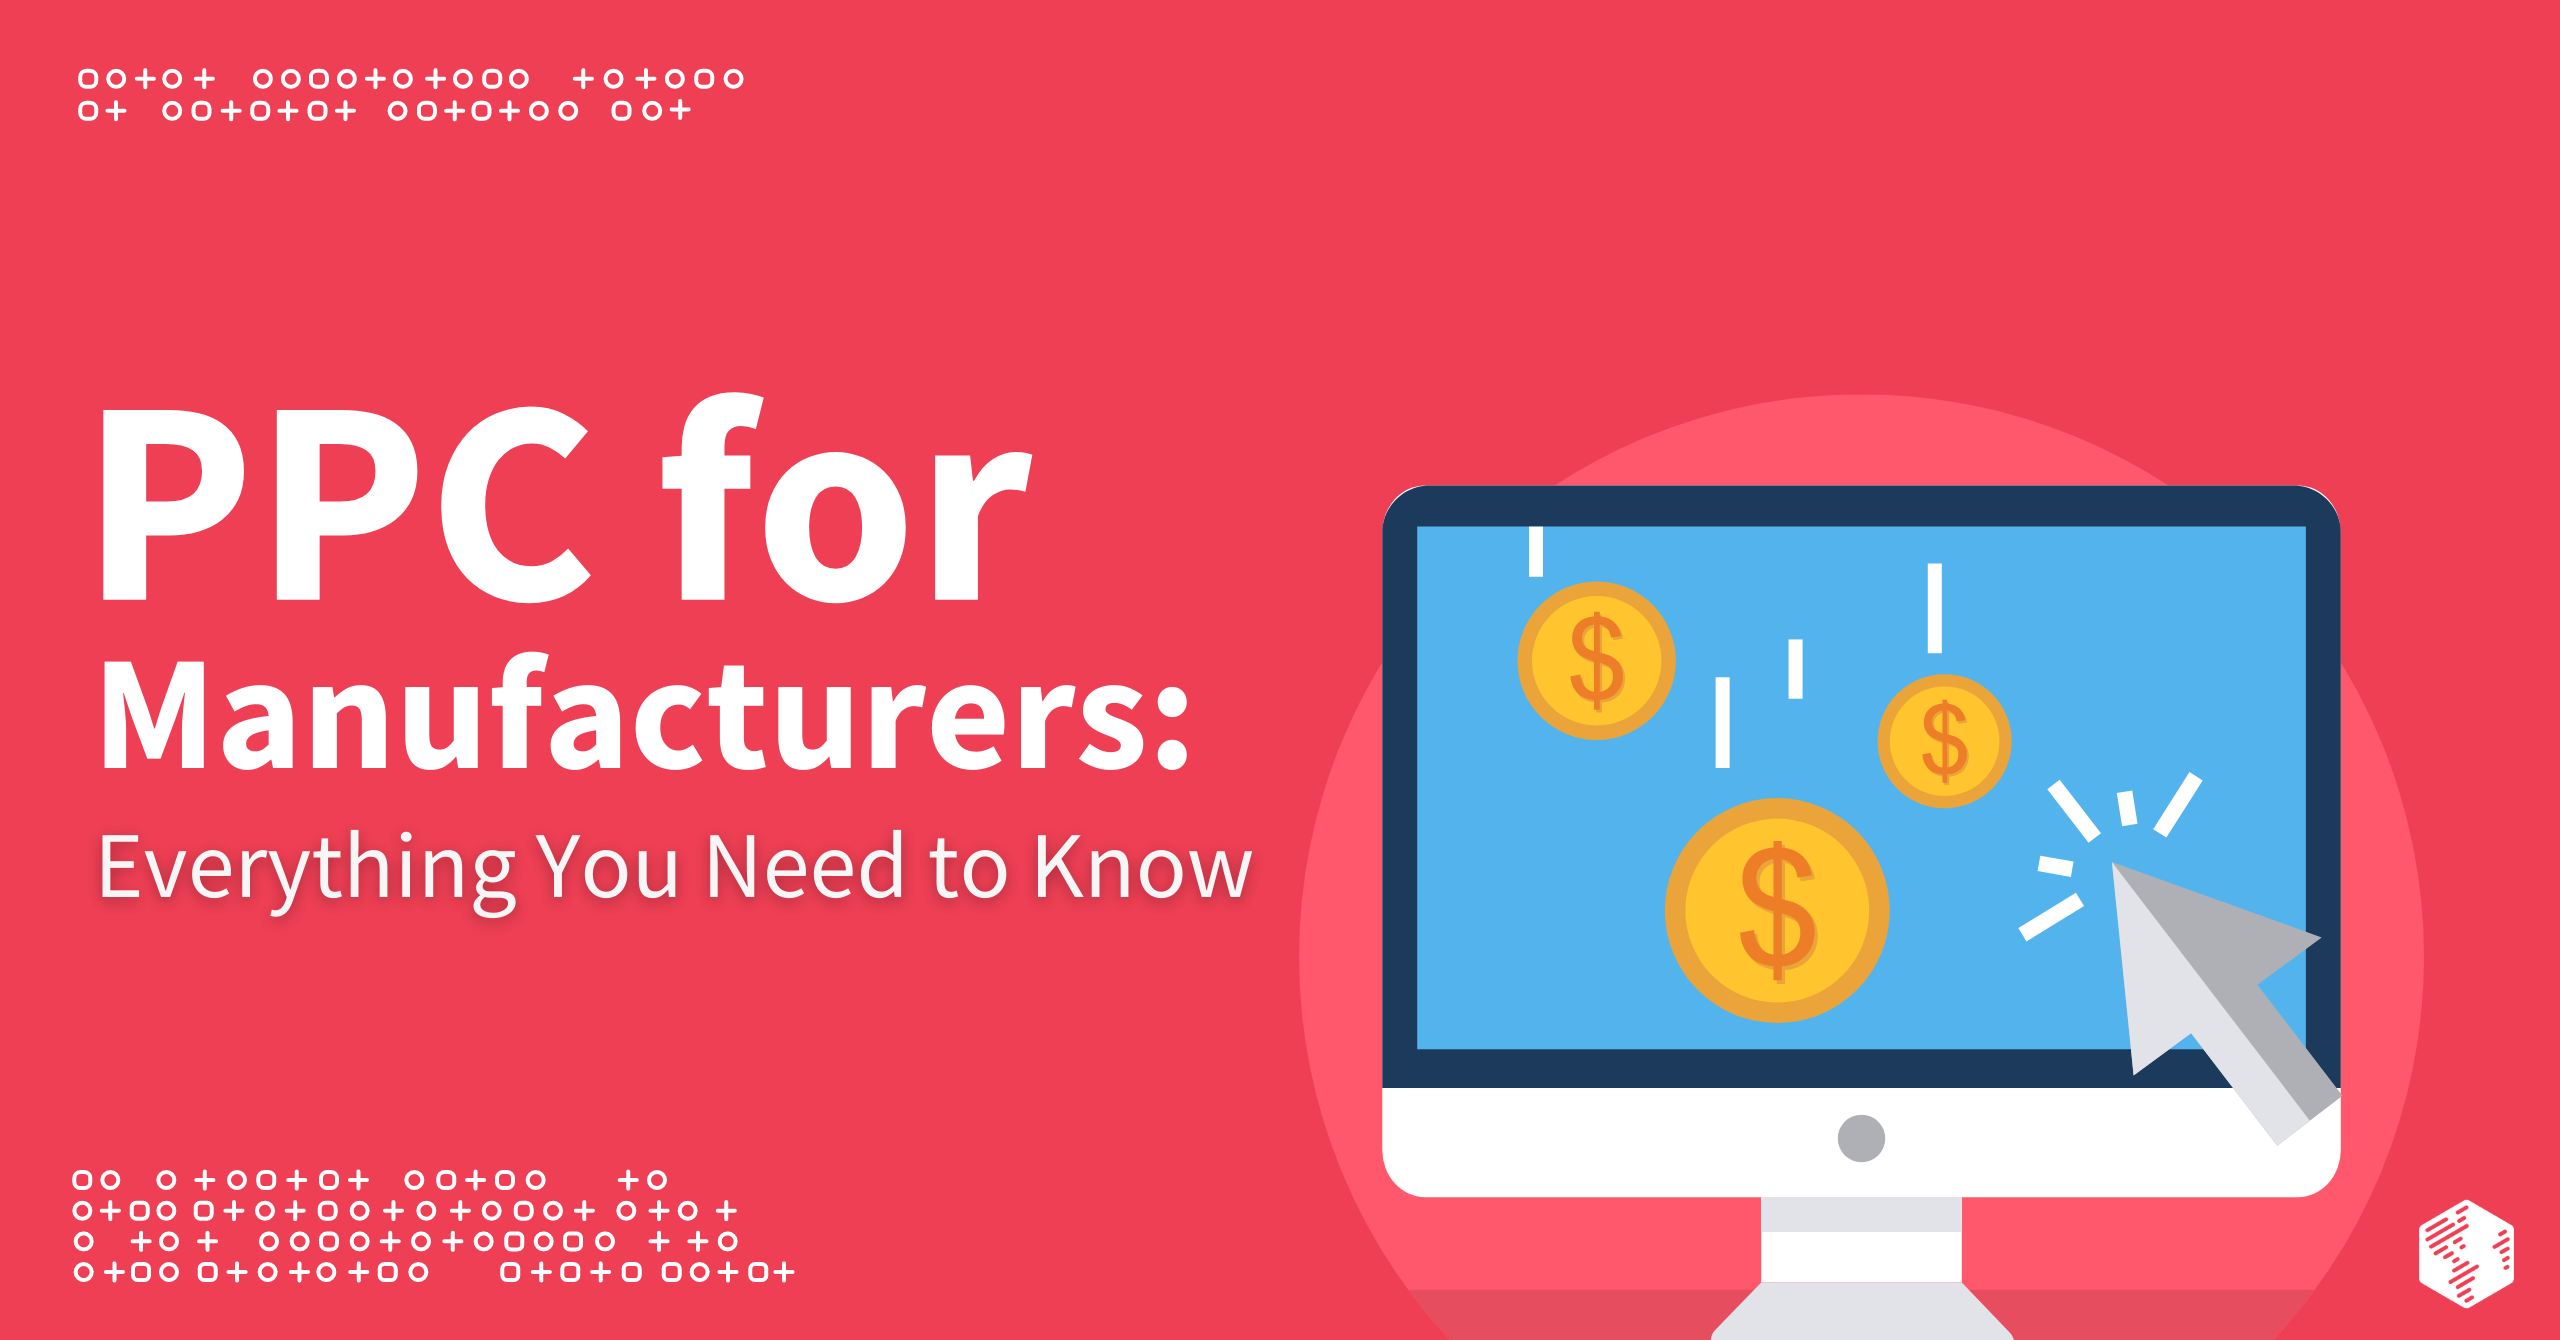 PPC for Manufacturers: Everything You Need to Know